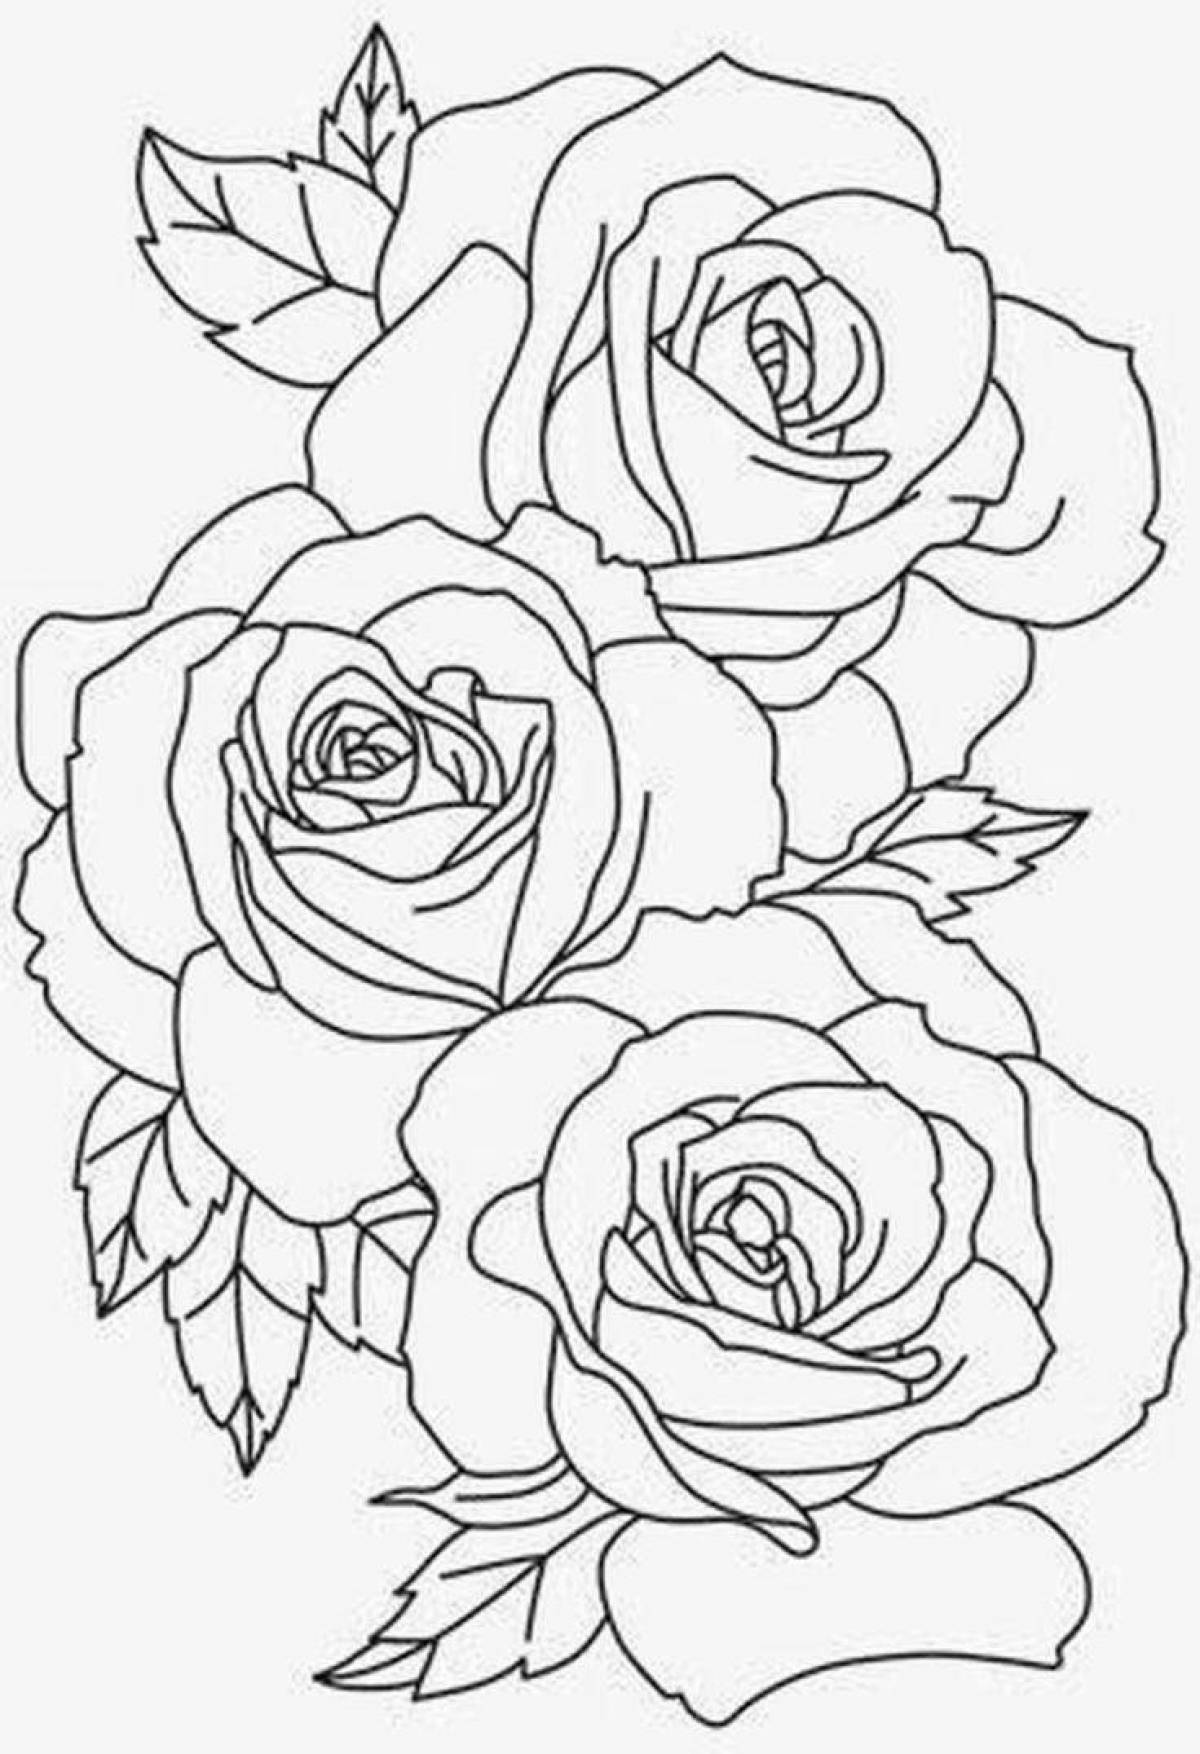 Bright coloring roses by numbers